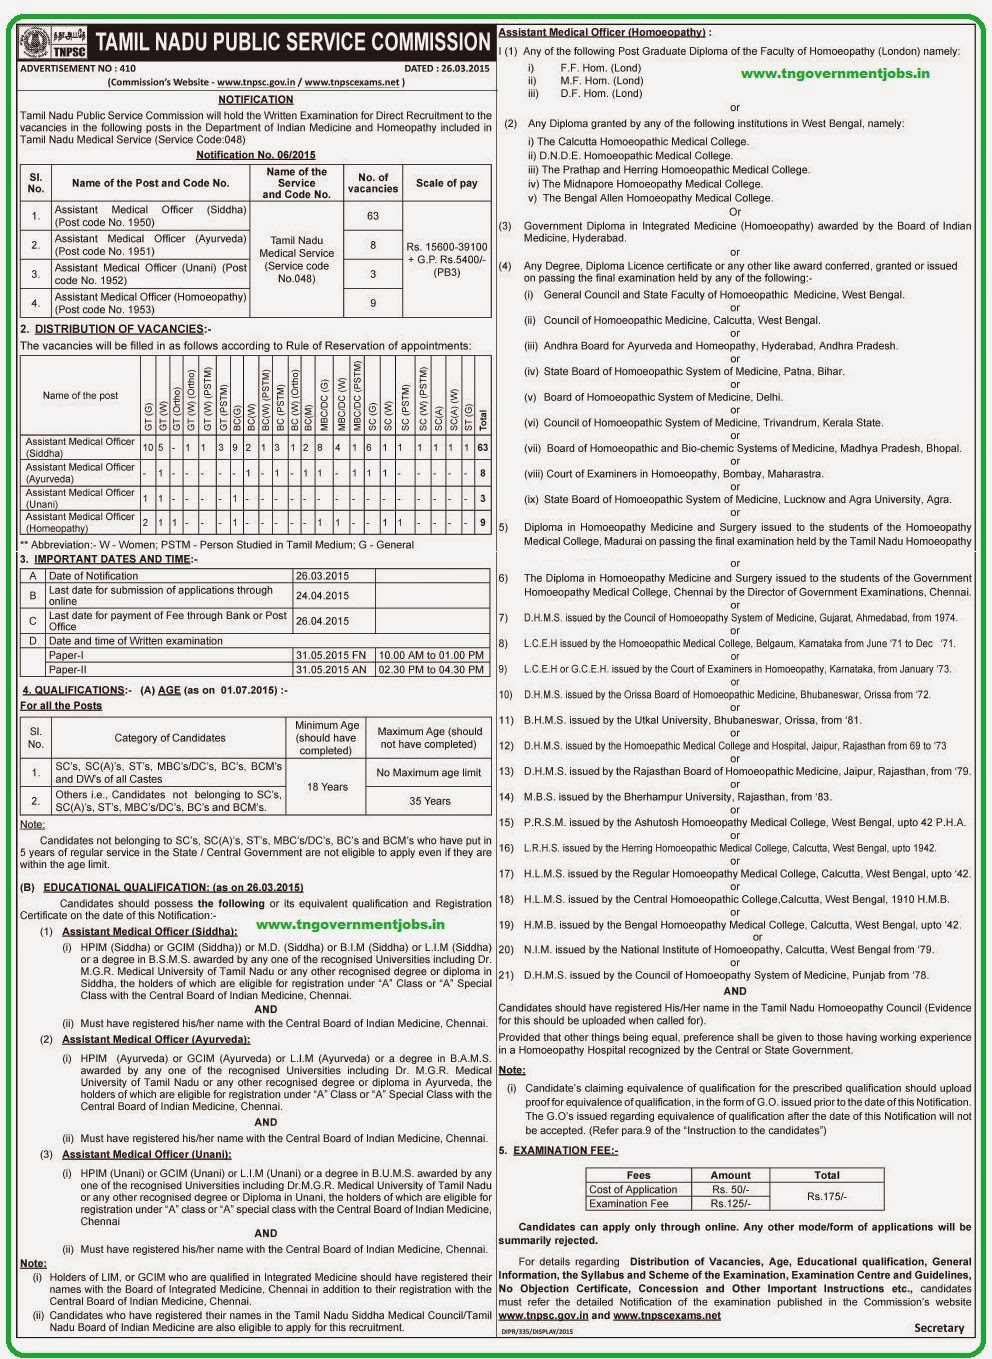 Tamil Nadu Public Service Commission (TNPSC) Siddha, Ayurveda, Unani and Homoeopathy Doctors Vacancy (www.tngovernmentjobs.in)